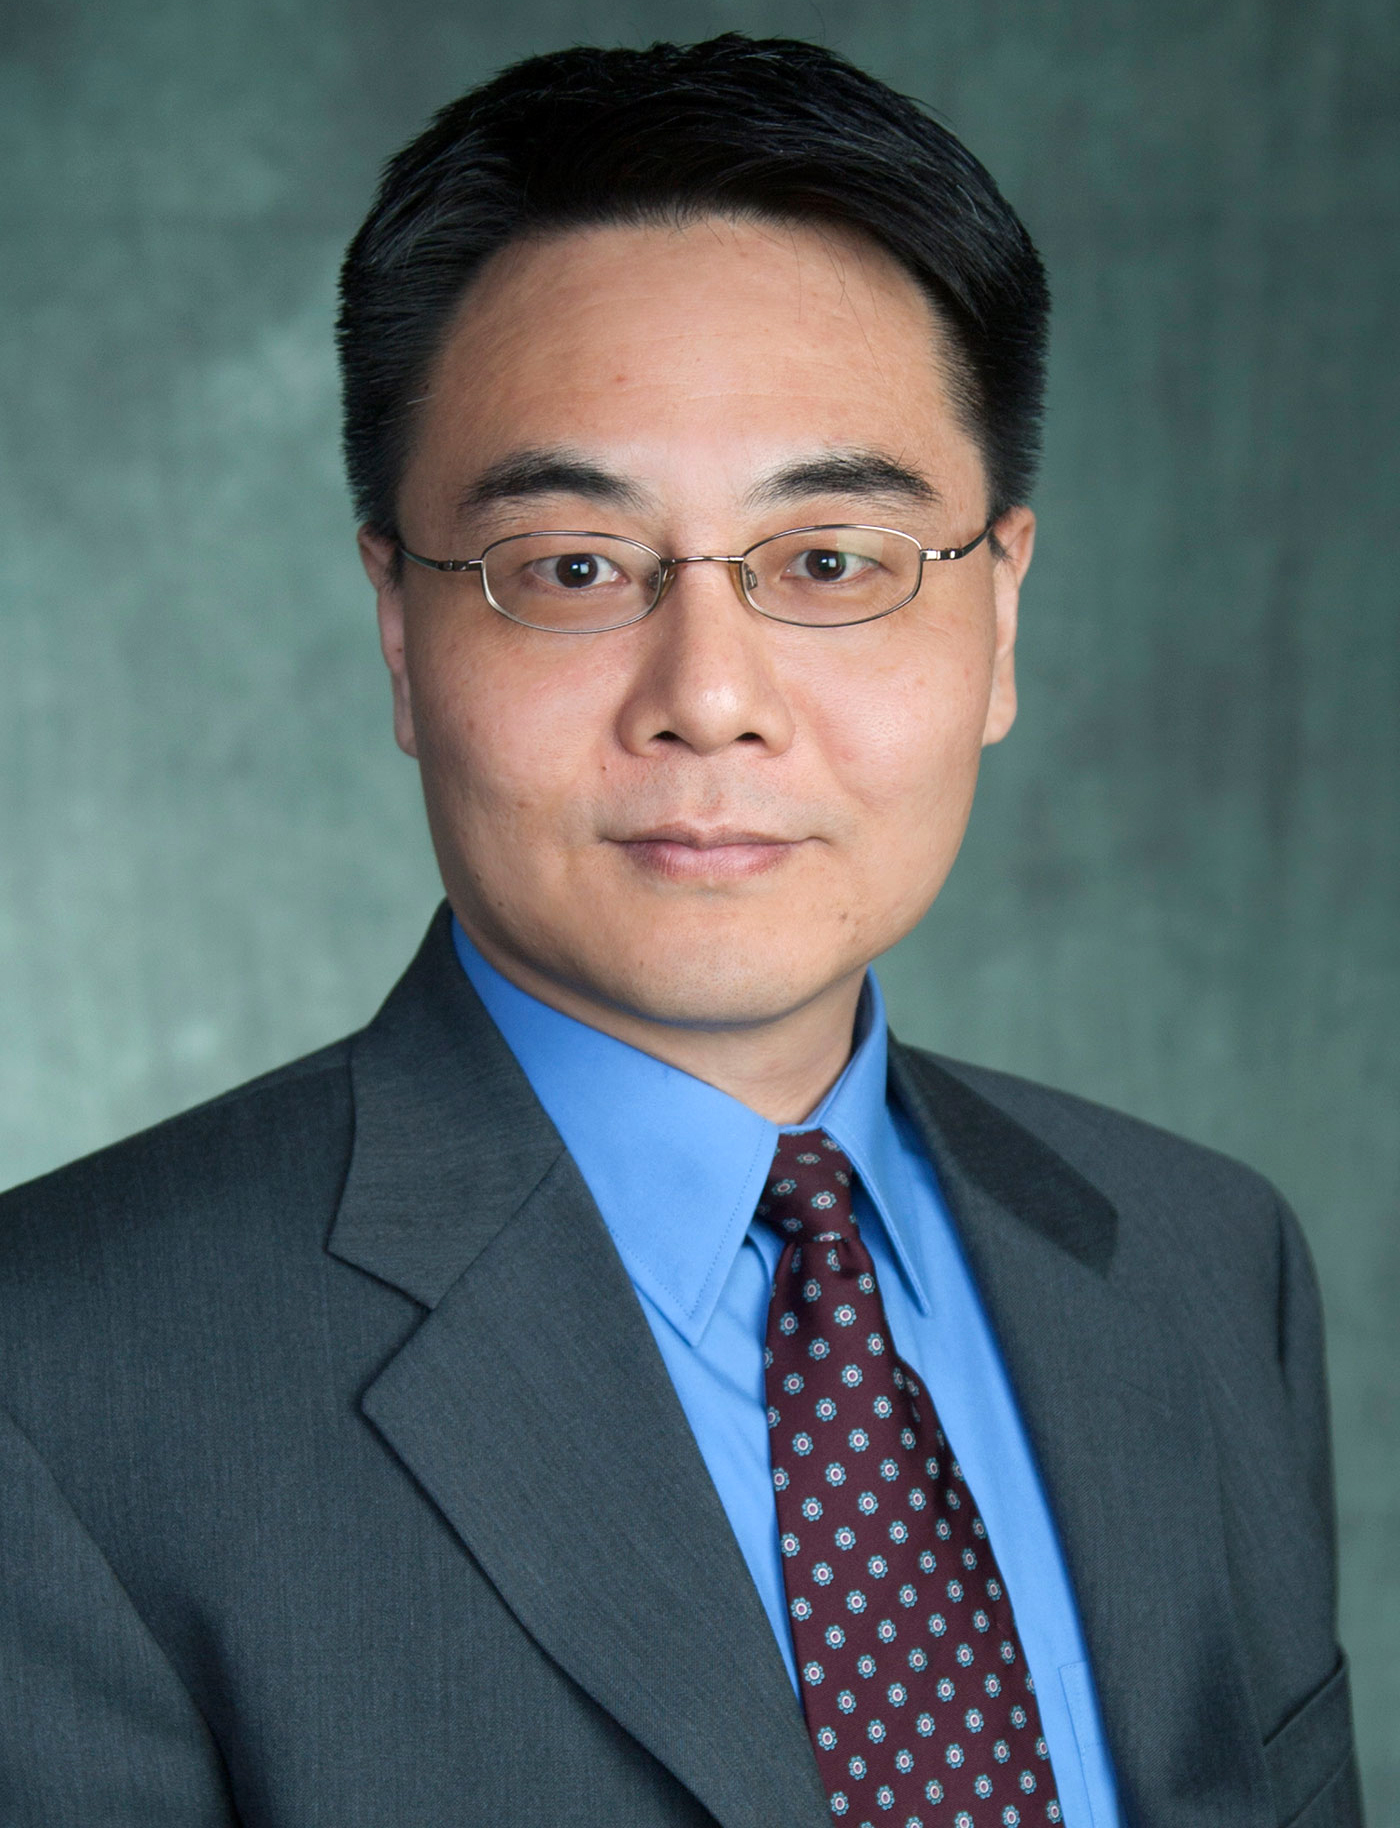 Tao (Tony) Gao is an Associate Professor in the Department of Marketing at UMass Lowell.